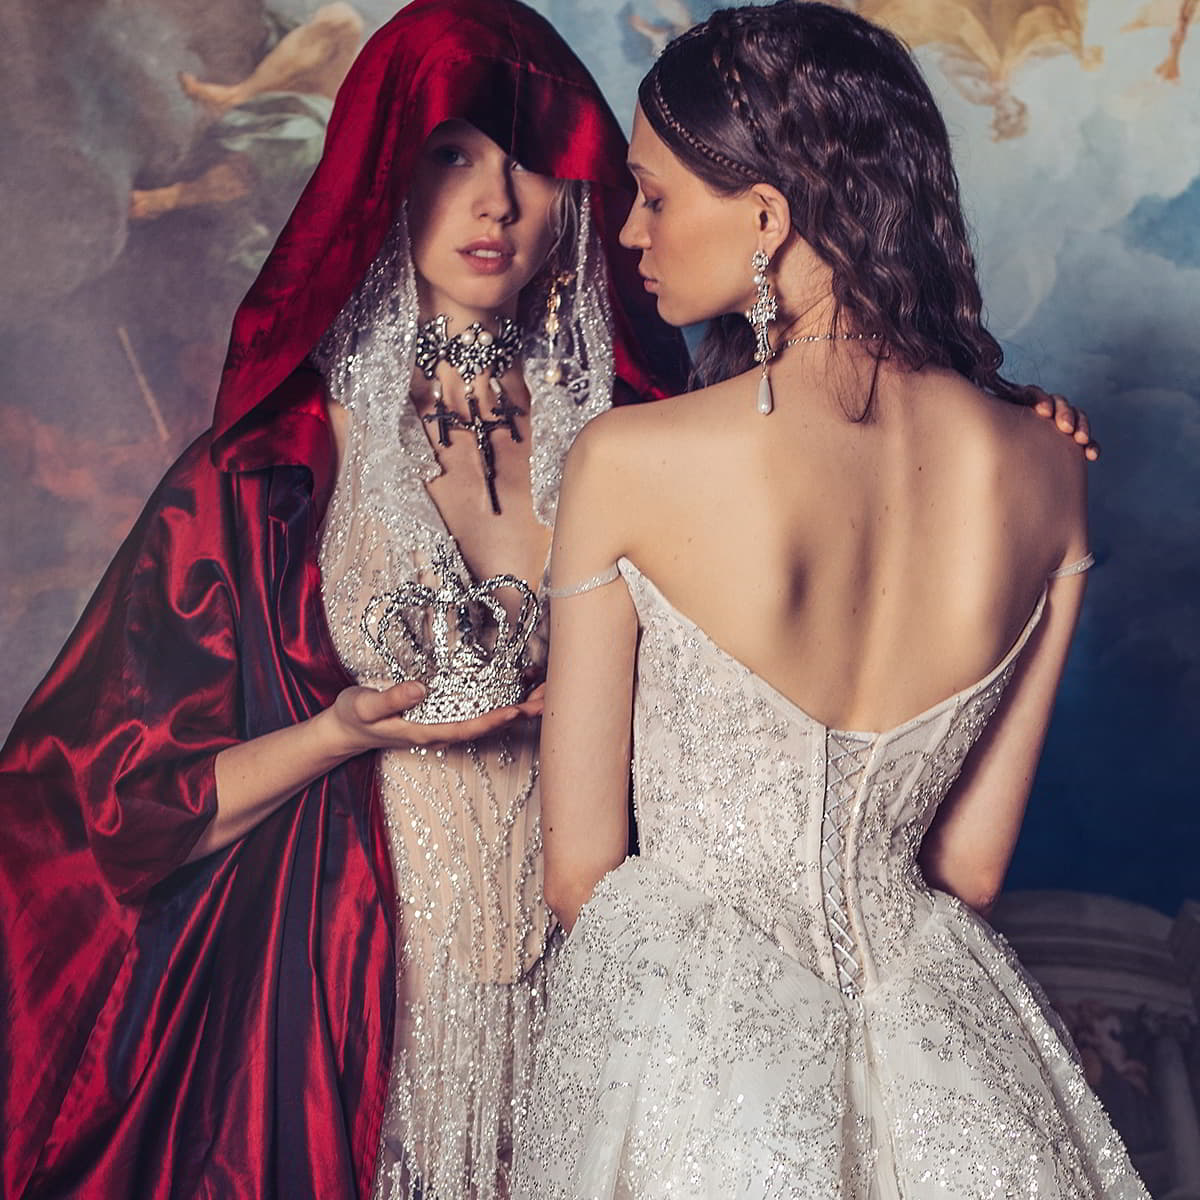 Haute Couture Spring/Summer 2020: Luxury Wedding Dresses for Every